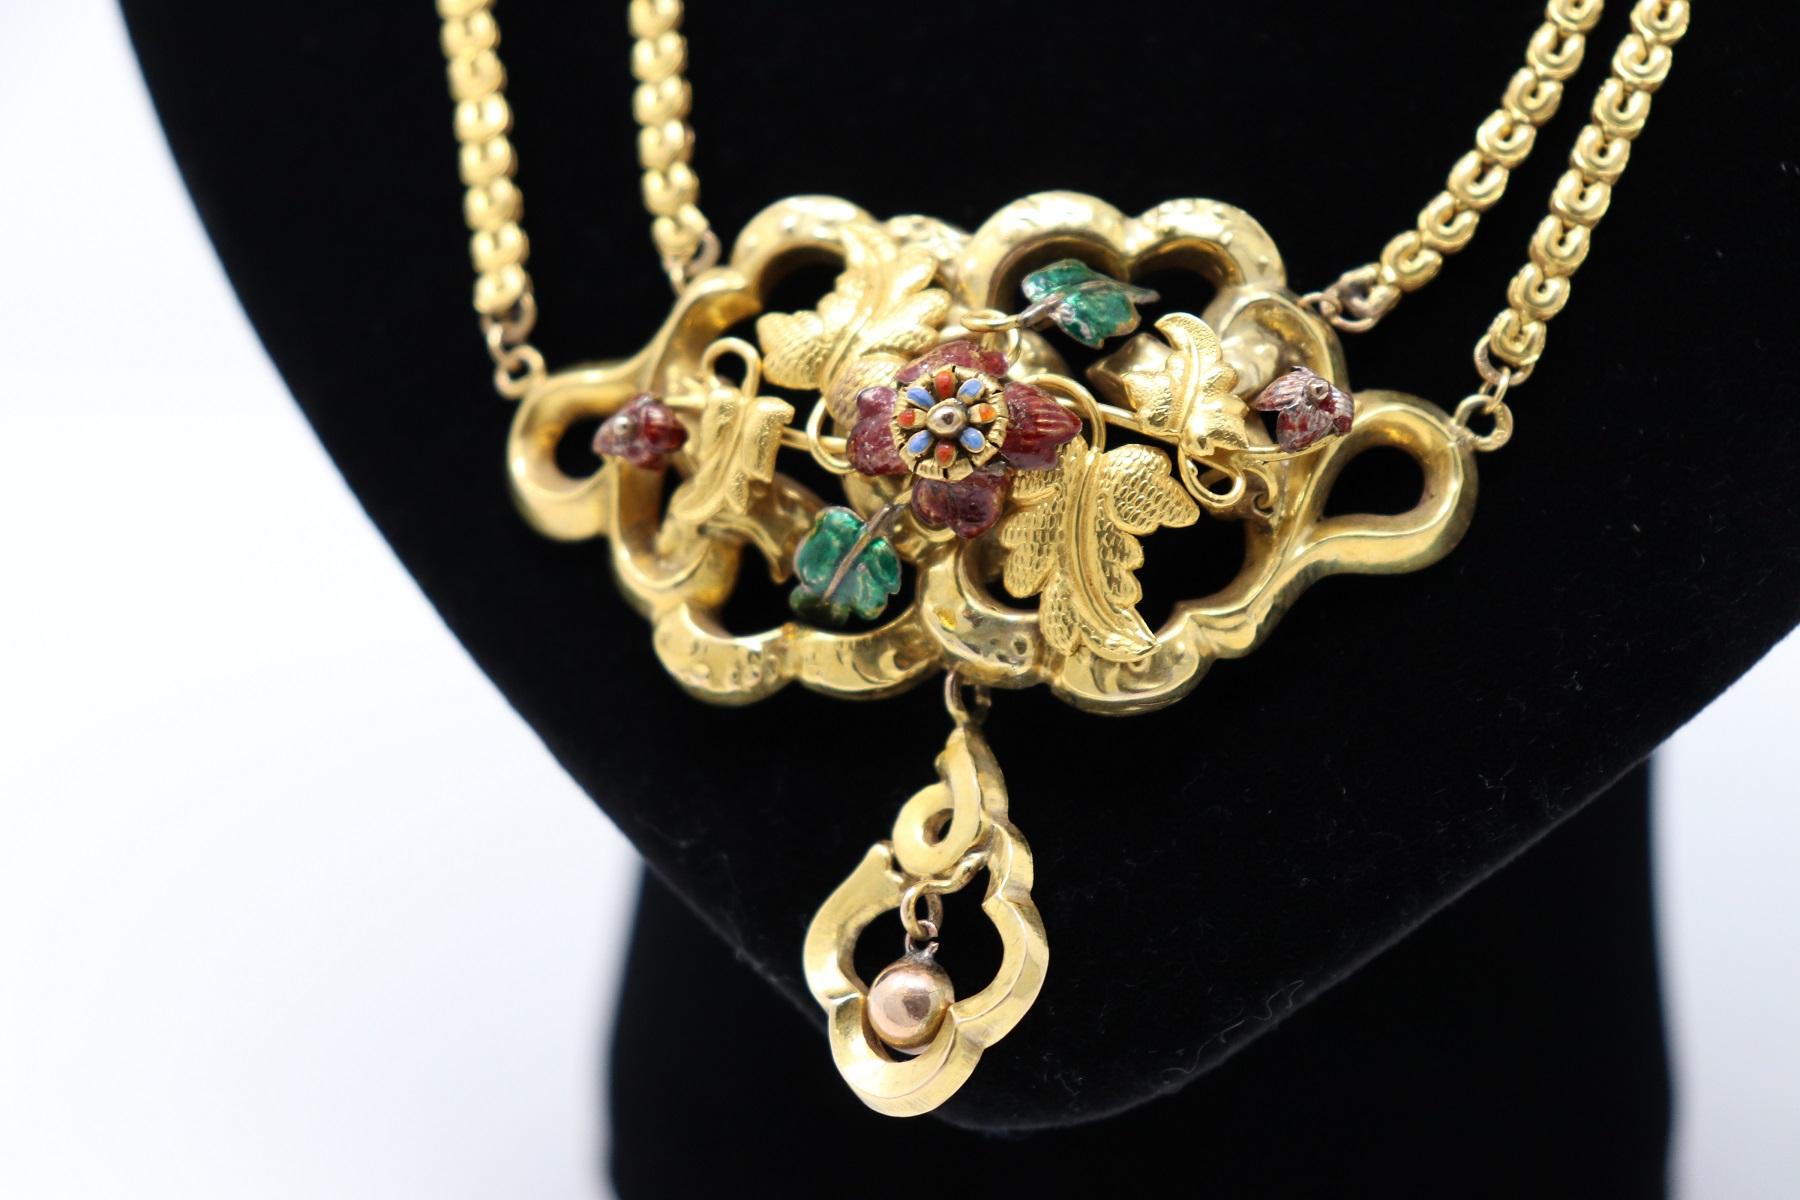 Women's 19th Century Gold Necklace with a Large Bourbon Pendant, 1850 For Sale